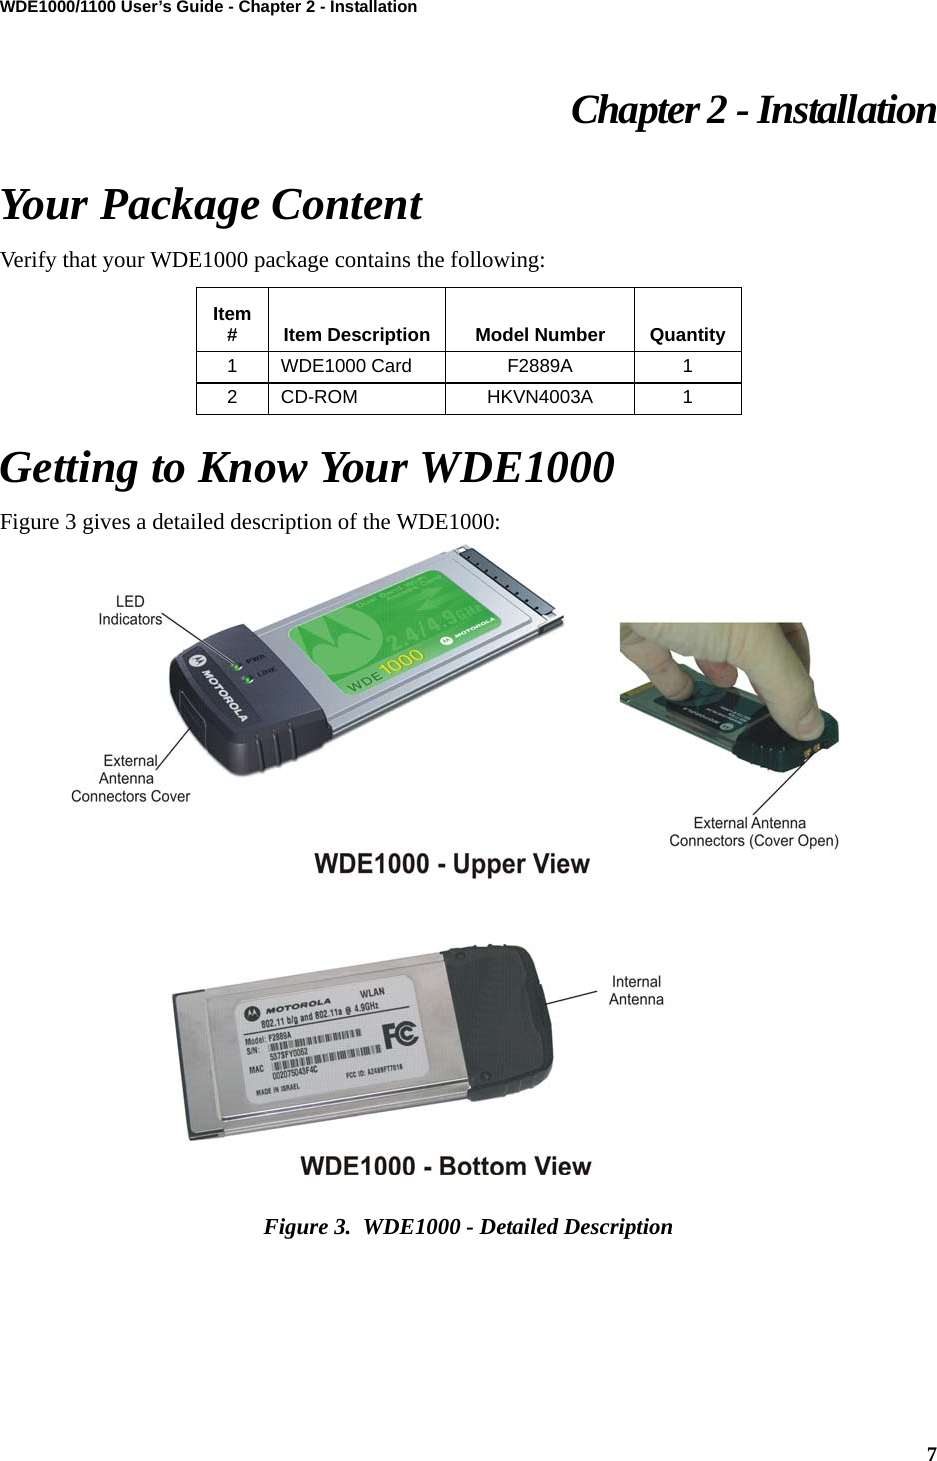 7WDE1000/1100 User’s Guide - Chapter 2 - InstallationChapter 2 - InstallationYour Package ContentVerify that your WDE1000 package contains the following:Getting to Know Your WDE1000Figure 3 gives a detailed description of the WDE1000:Figure 3.  WDE1000 - Detailed DescriptionItem # Item Description Model Number Quantity1 WDE1000 Card F2889A 12 CD-ROM HKVN4003A 1